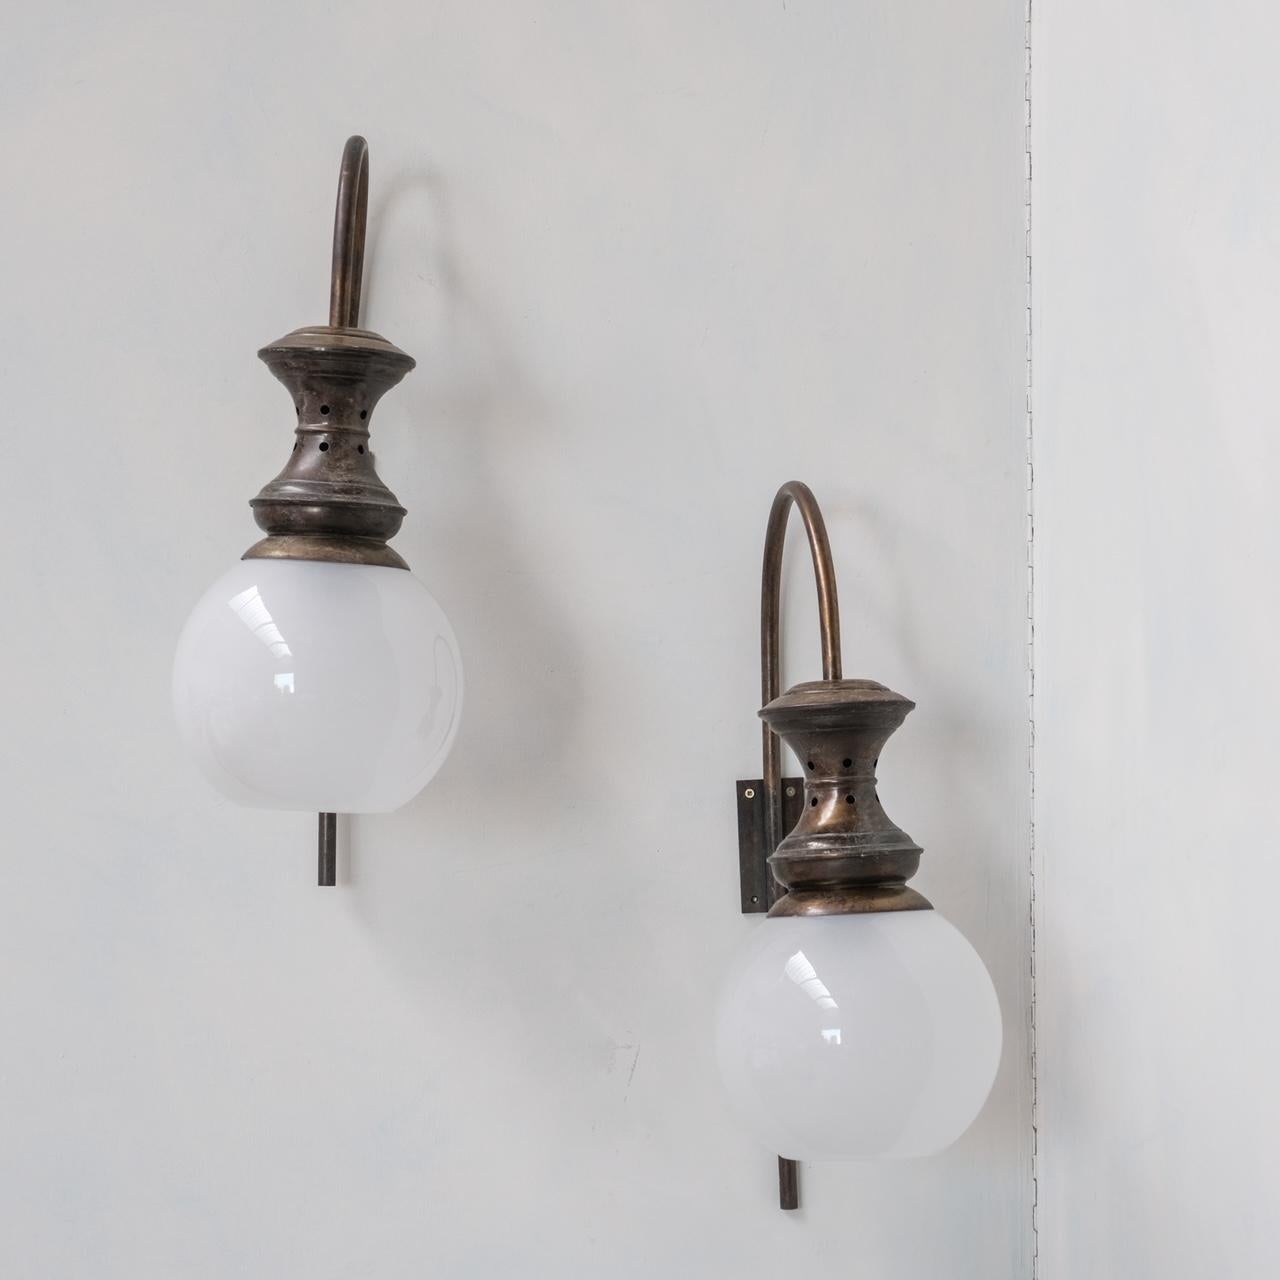 A pair of mid-century wall lights, in the manner of Caccia Dominioni. 

Italy, c1960s. 

Patinated brass and etched glass shades. 

Please note these are in vintage condition, there are small dings, slight bends in the curved necks of the